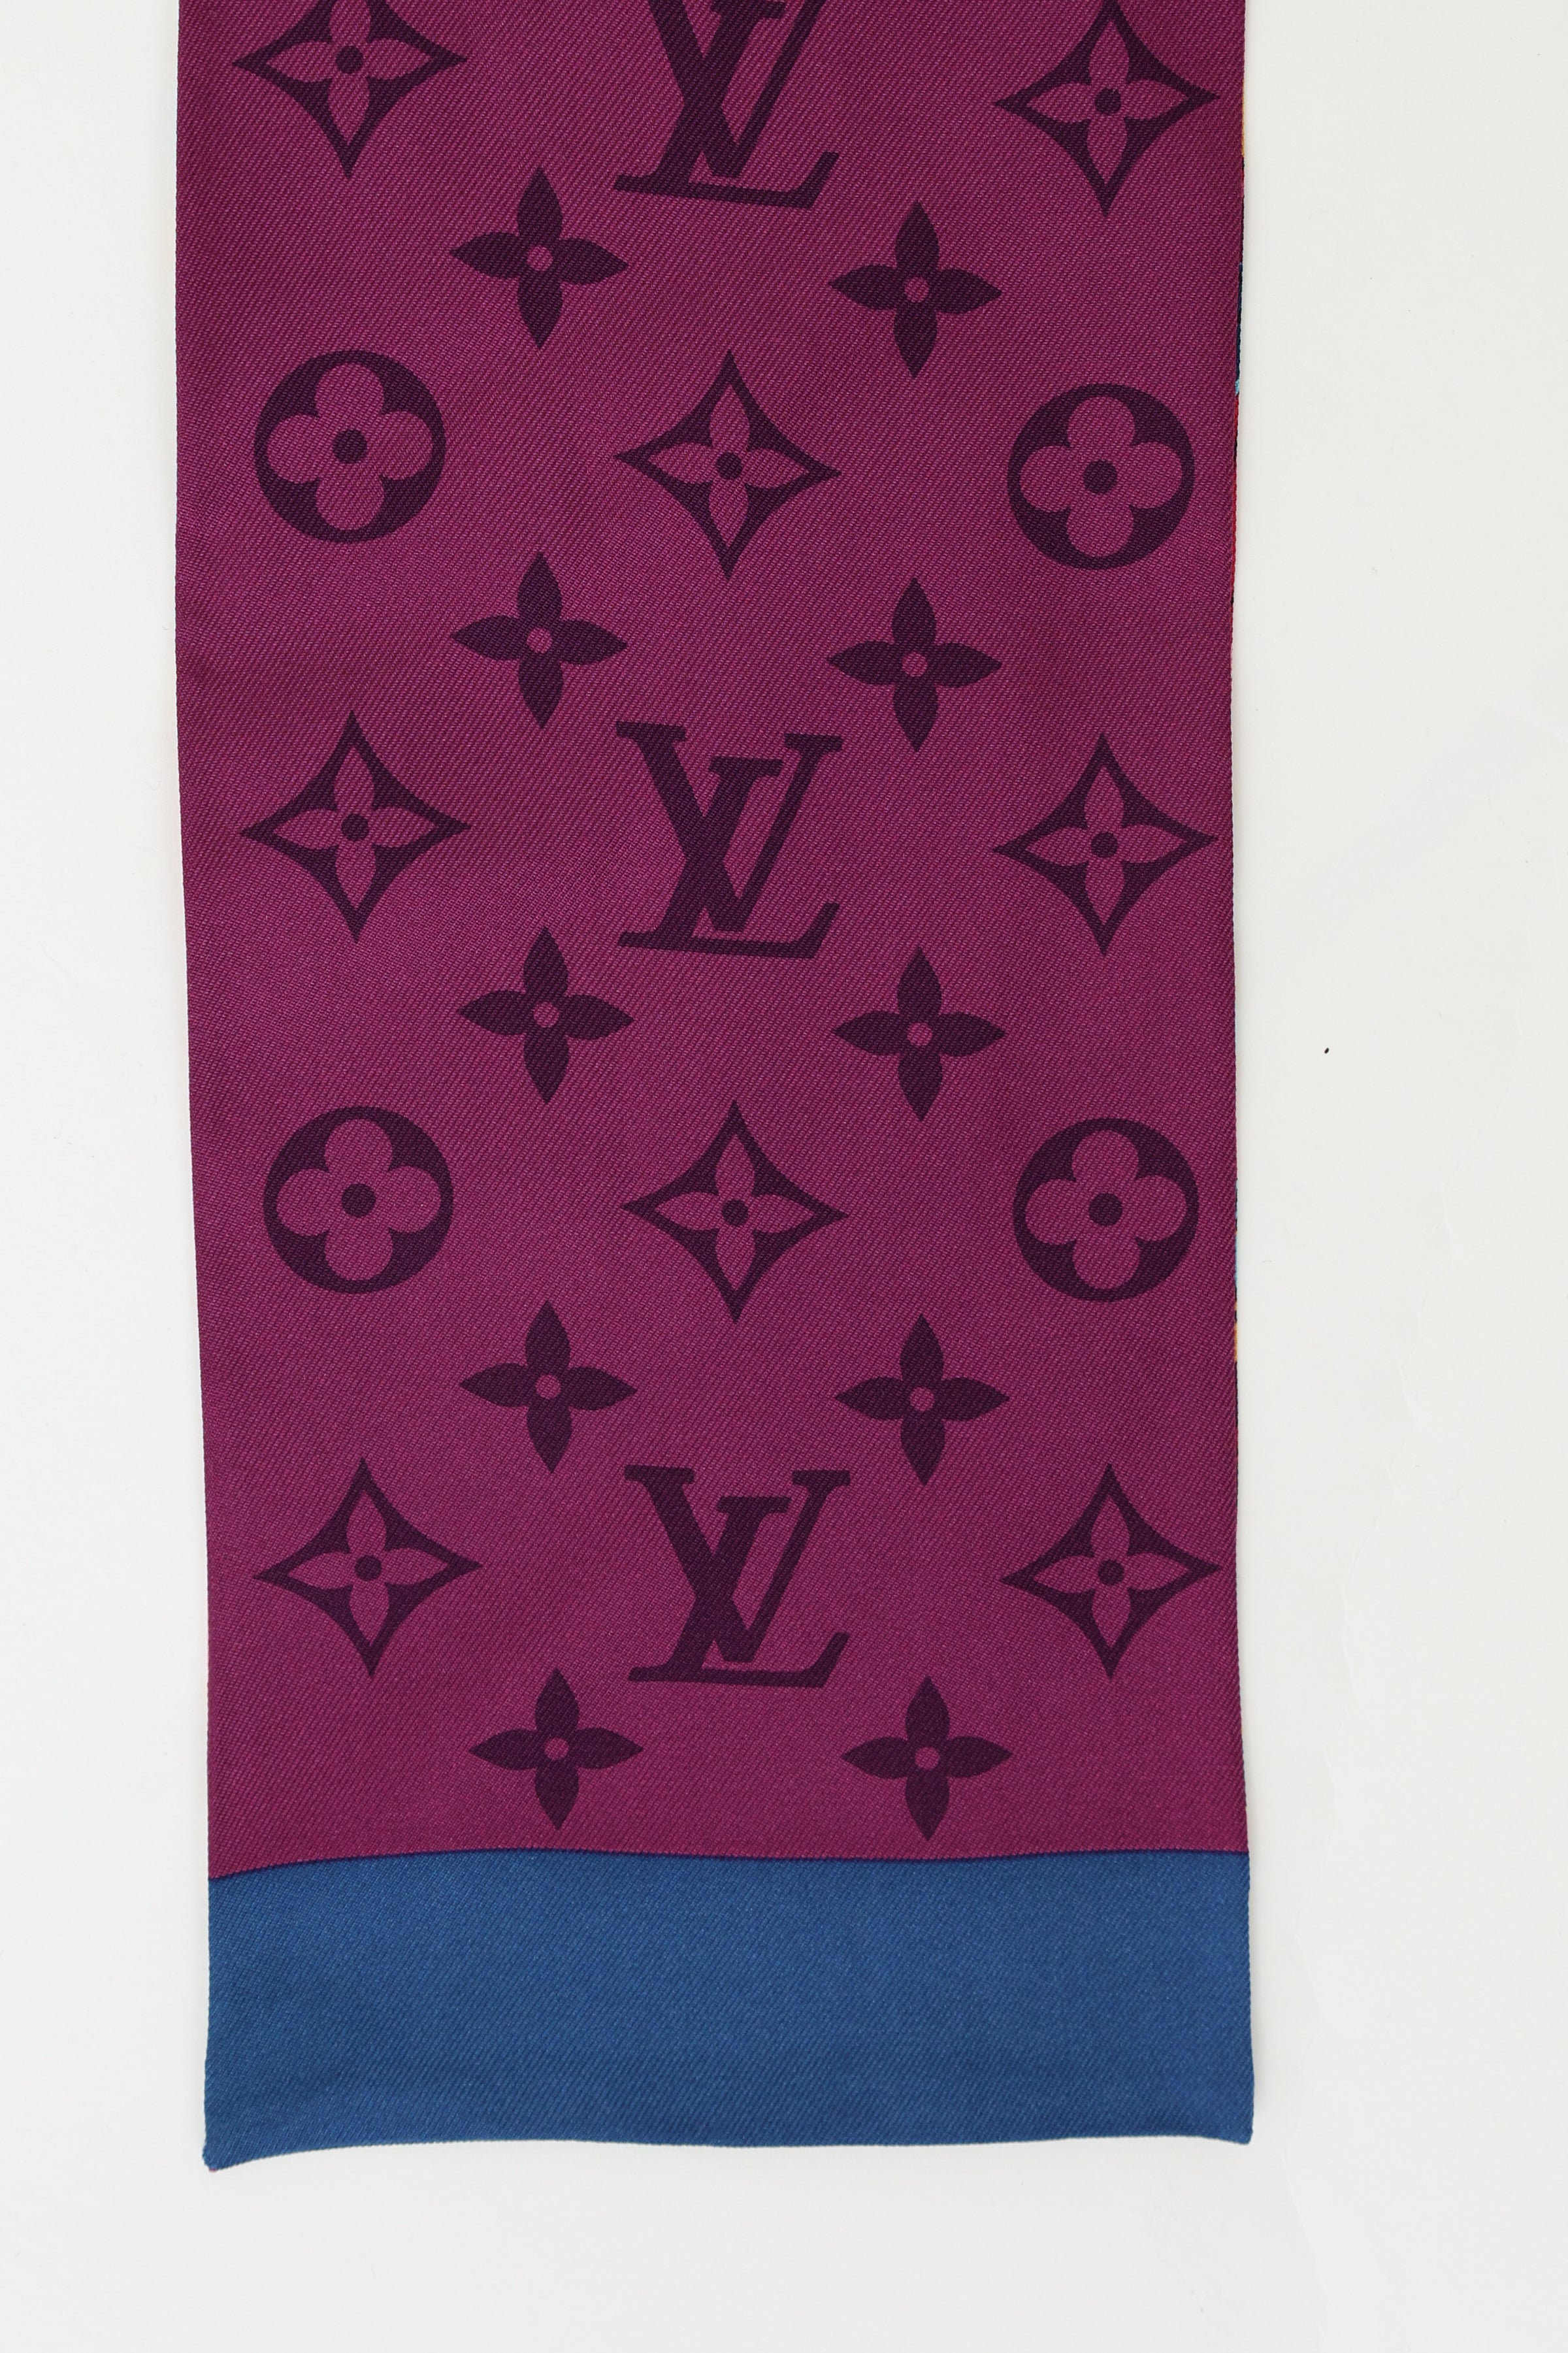 Louis Vuitton Scarves for sale in Port Perry, Ontario